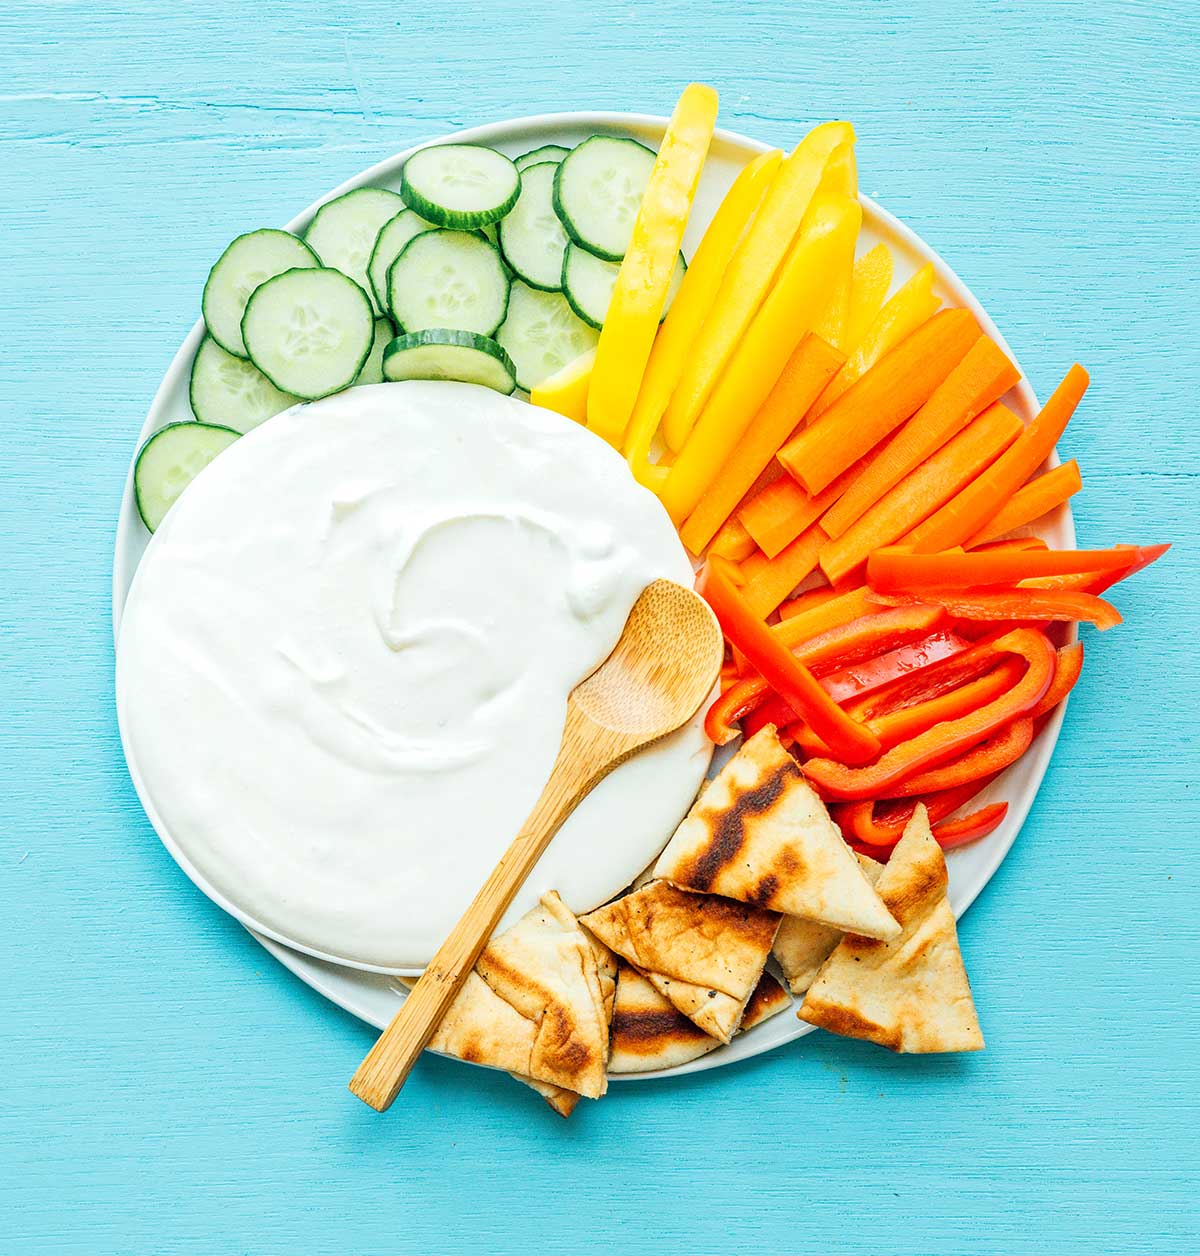 A bowl of whipped feta spread on a white plate surrounded by sliced cucumbers, sliced bell peppers, and pita bread